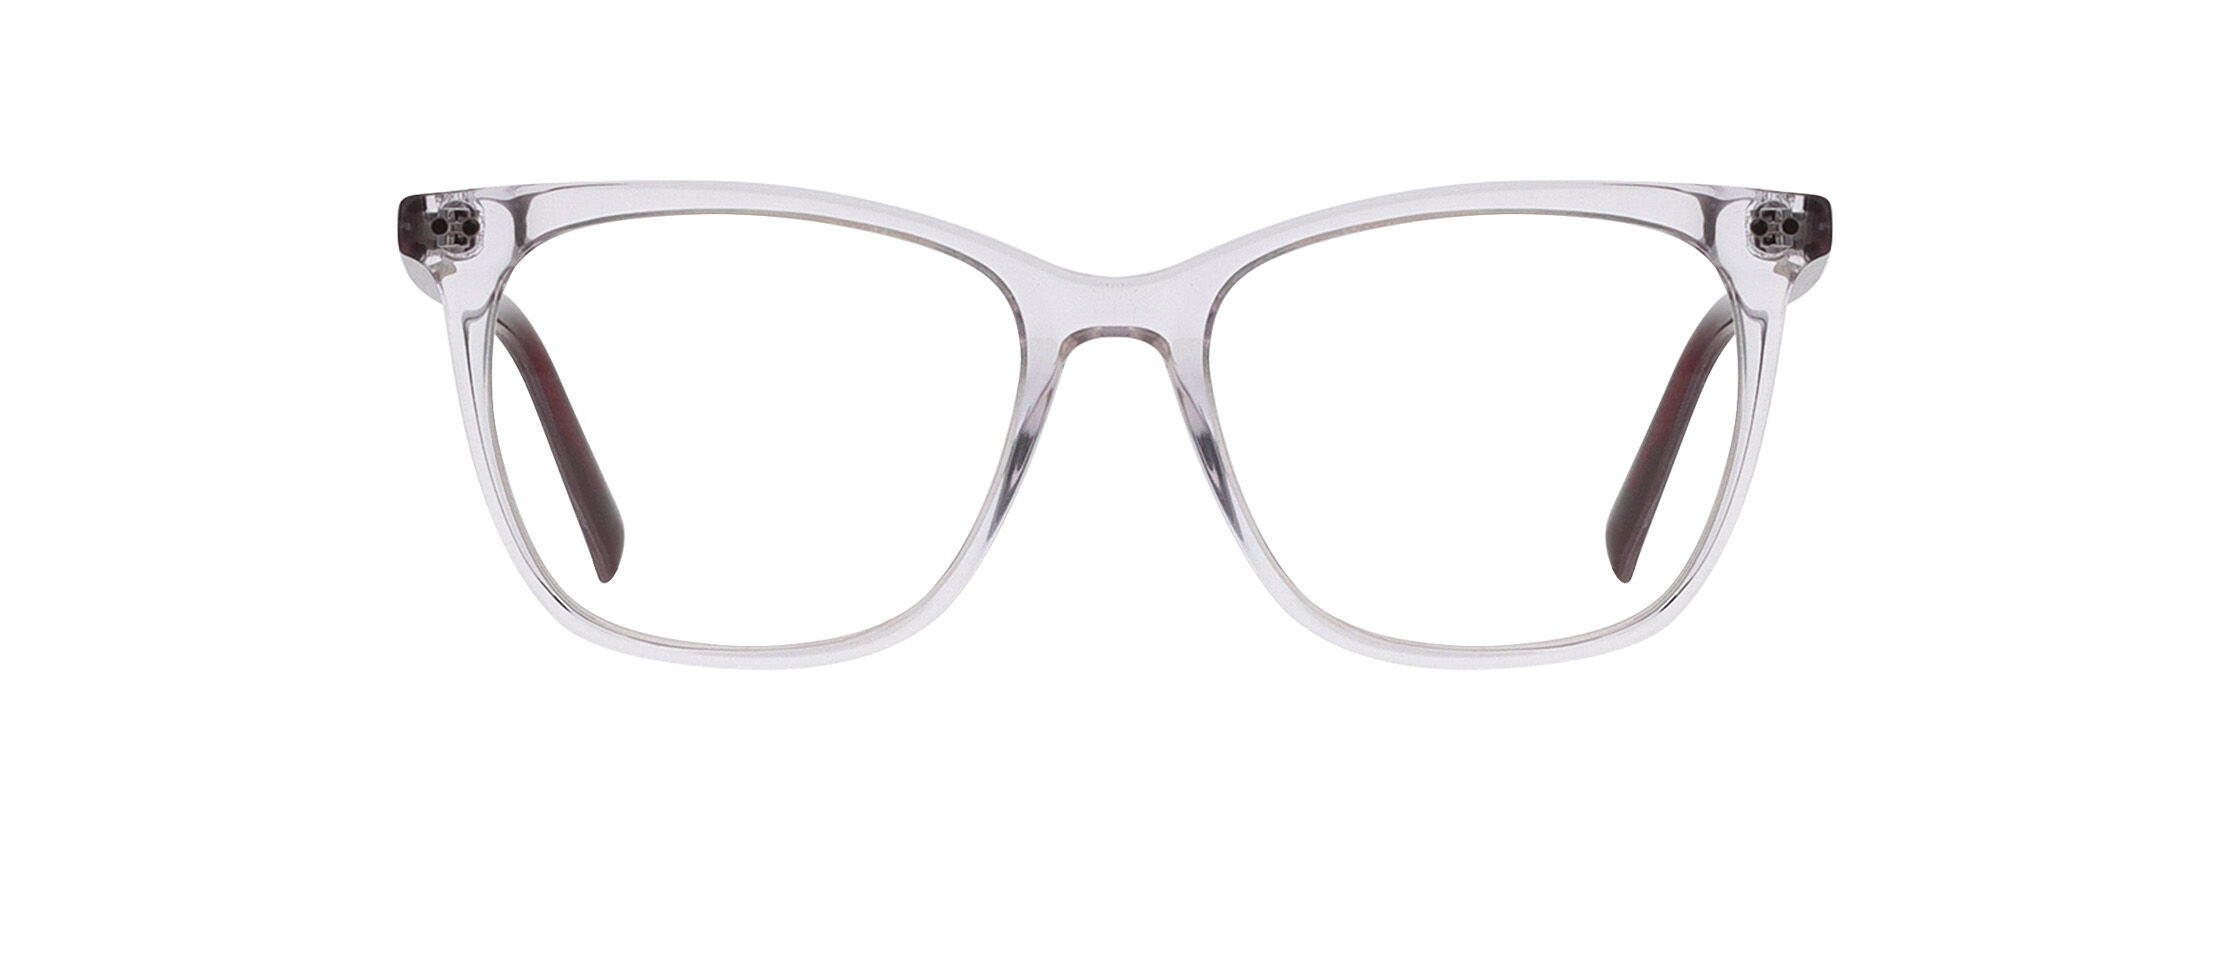 Marchon NYC M-5507 Glasses | Free Shipping and Returns